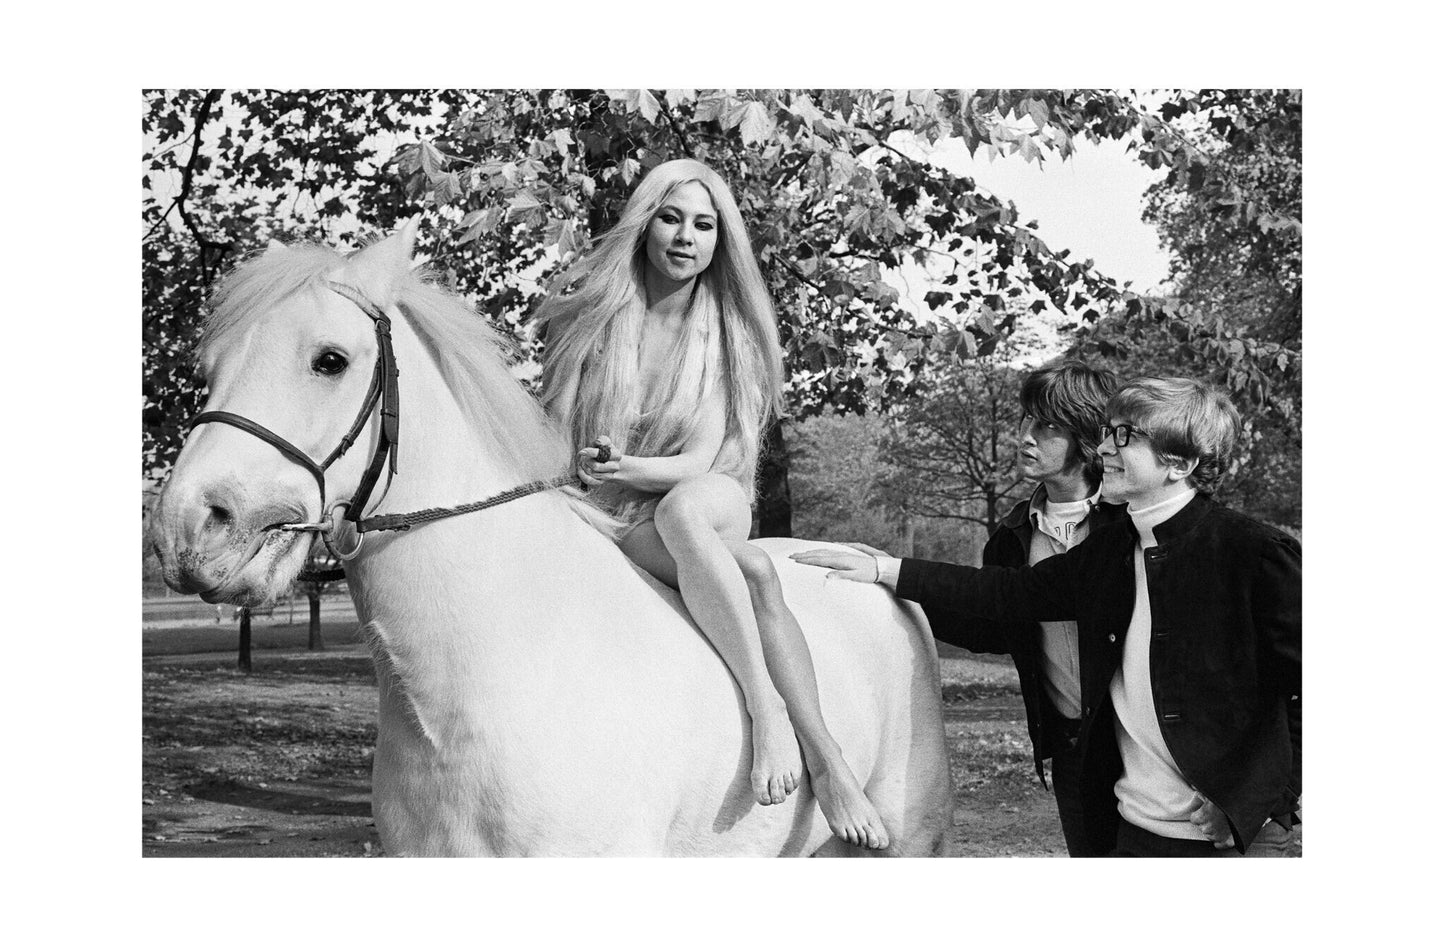 Peter and Gordon - With Lady Godiva on a Horse, England, 1960s Print